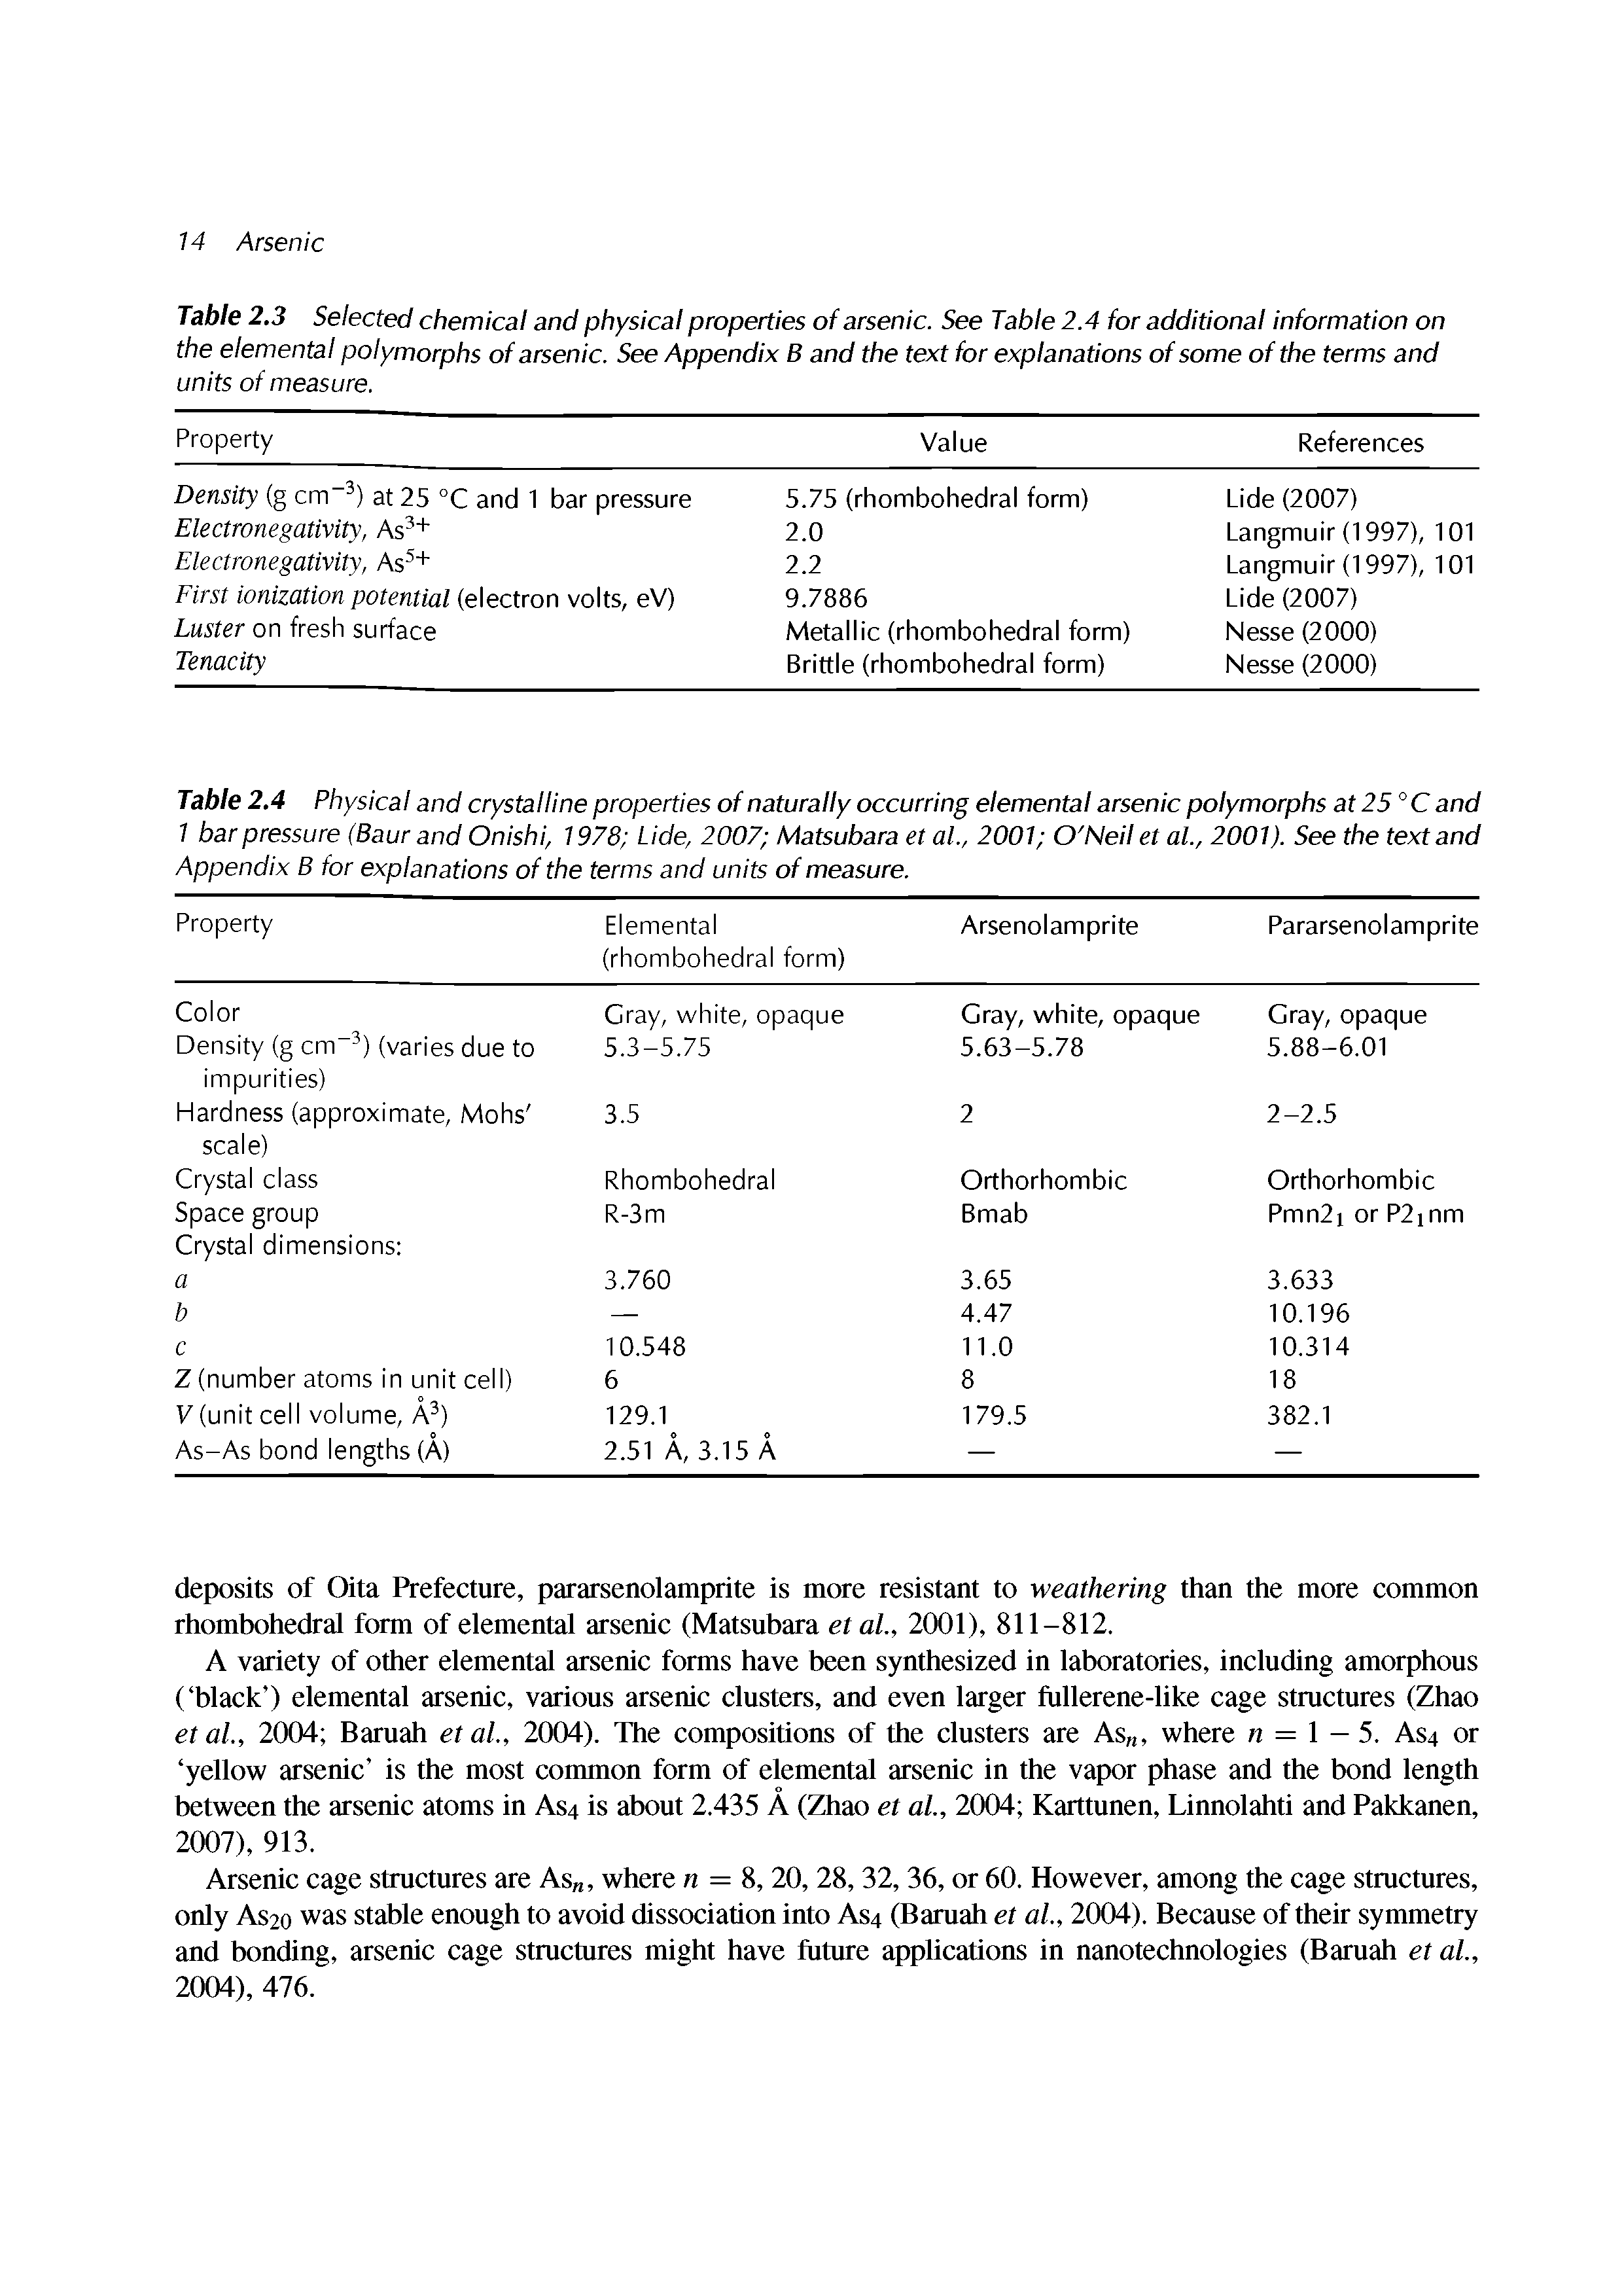 Table 2.3 Selected chemical and physical properties of arsenic. See Table 2.4 for additional information on the elemental polymorphs of arsenic. See Appendix B and the text for explanations of some of the terms and units of measure.